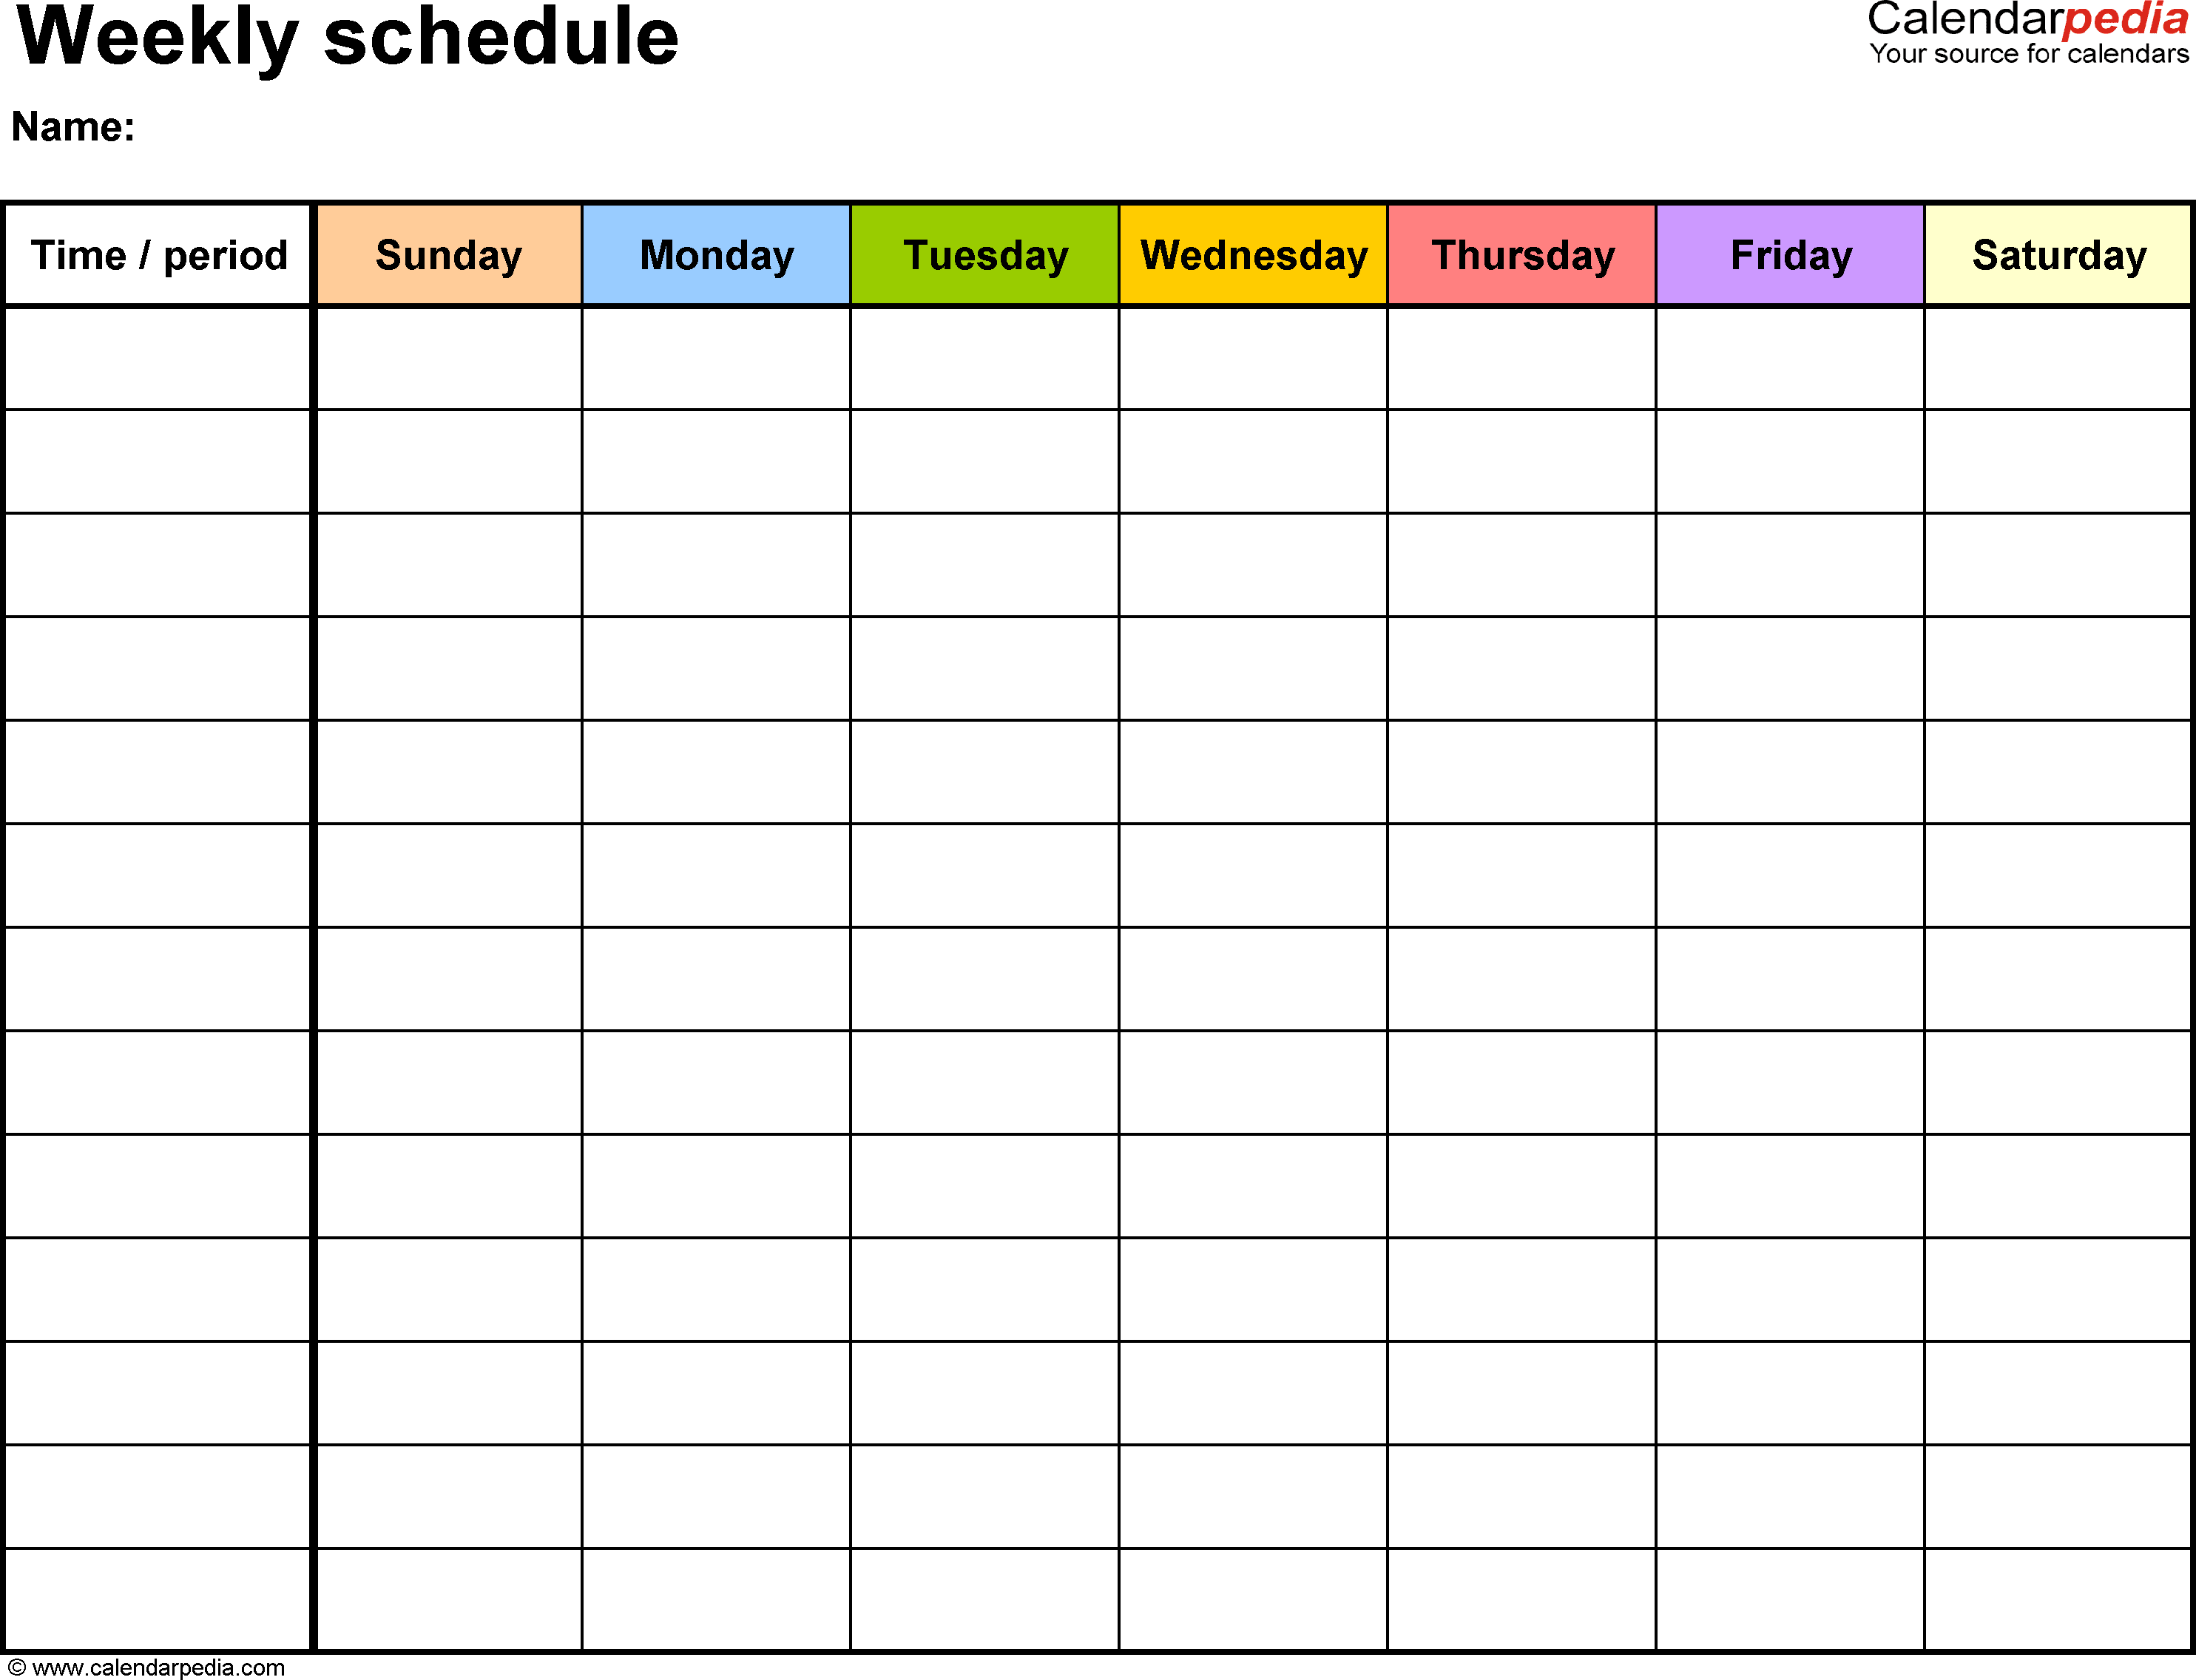 Free Weekly Schedule Templates